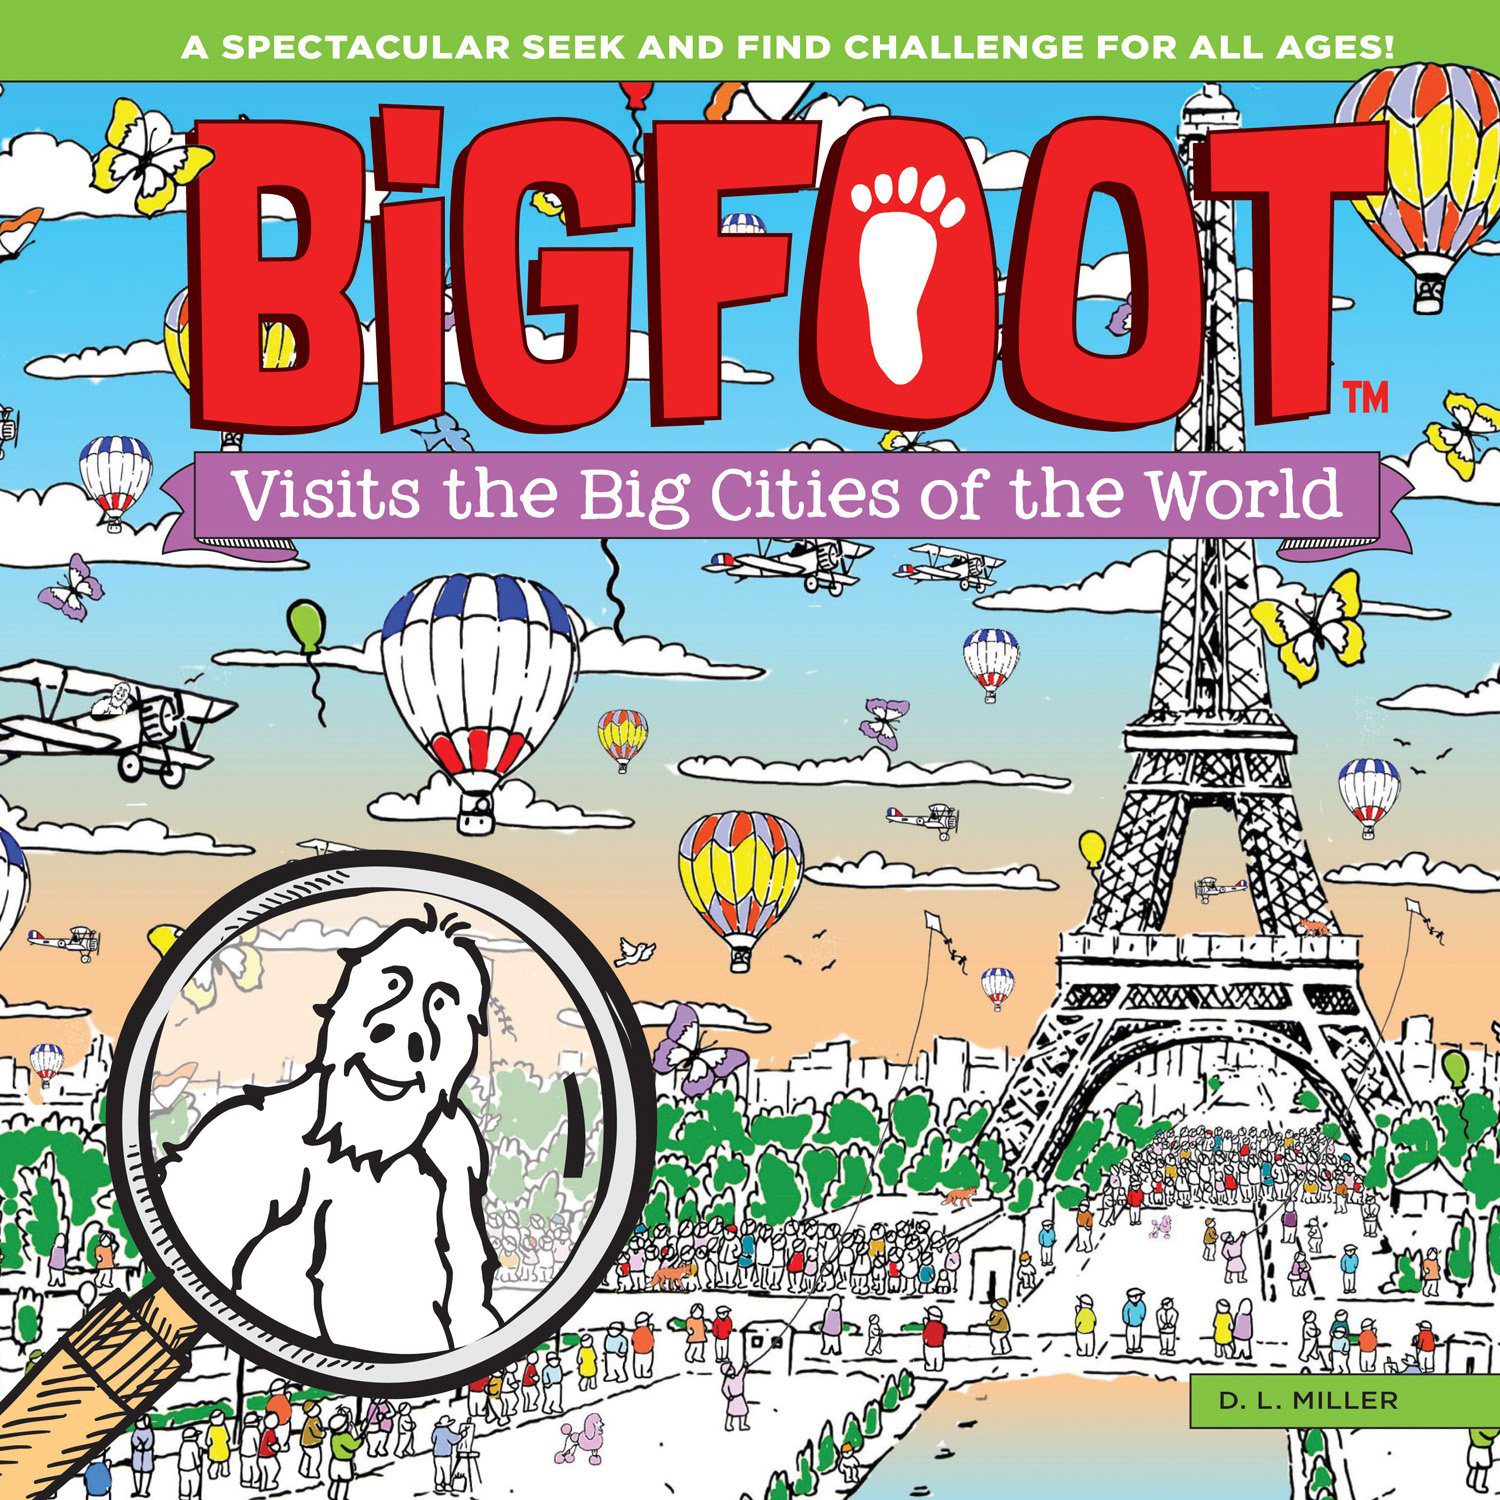 BigFoot Visits the Big Cities of the World: A Spectacular Seek and Find Challenge for All Ages!